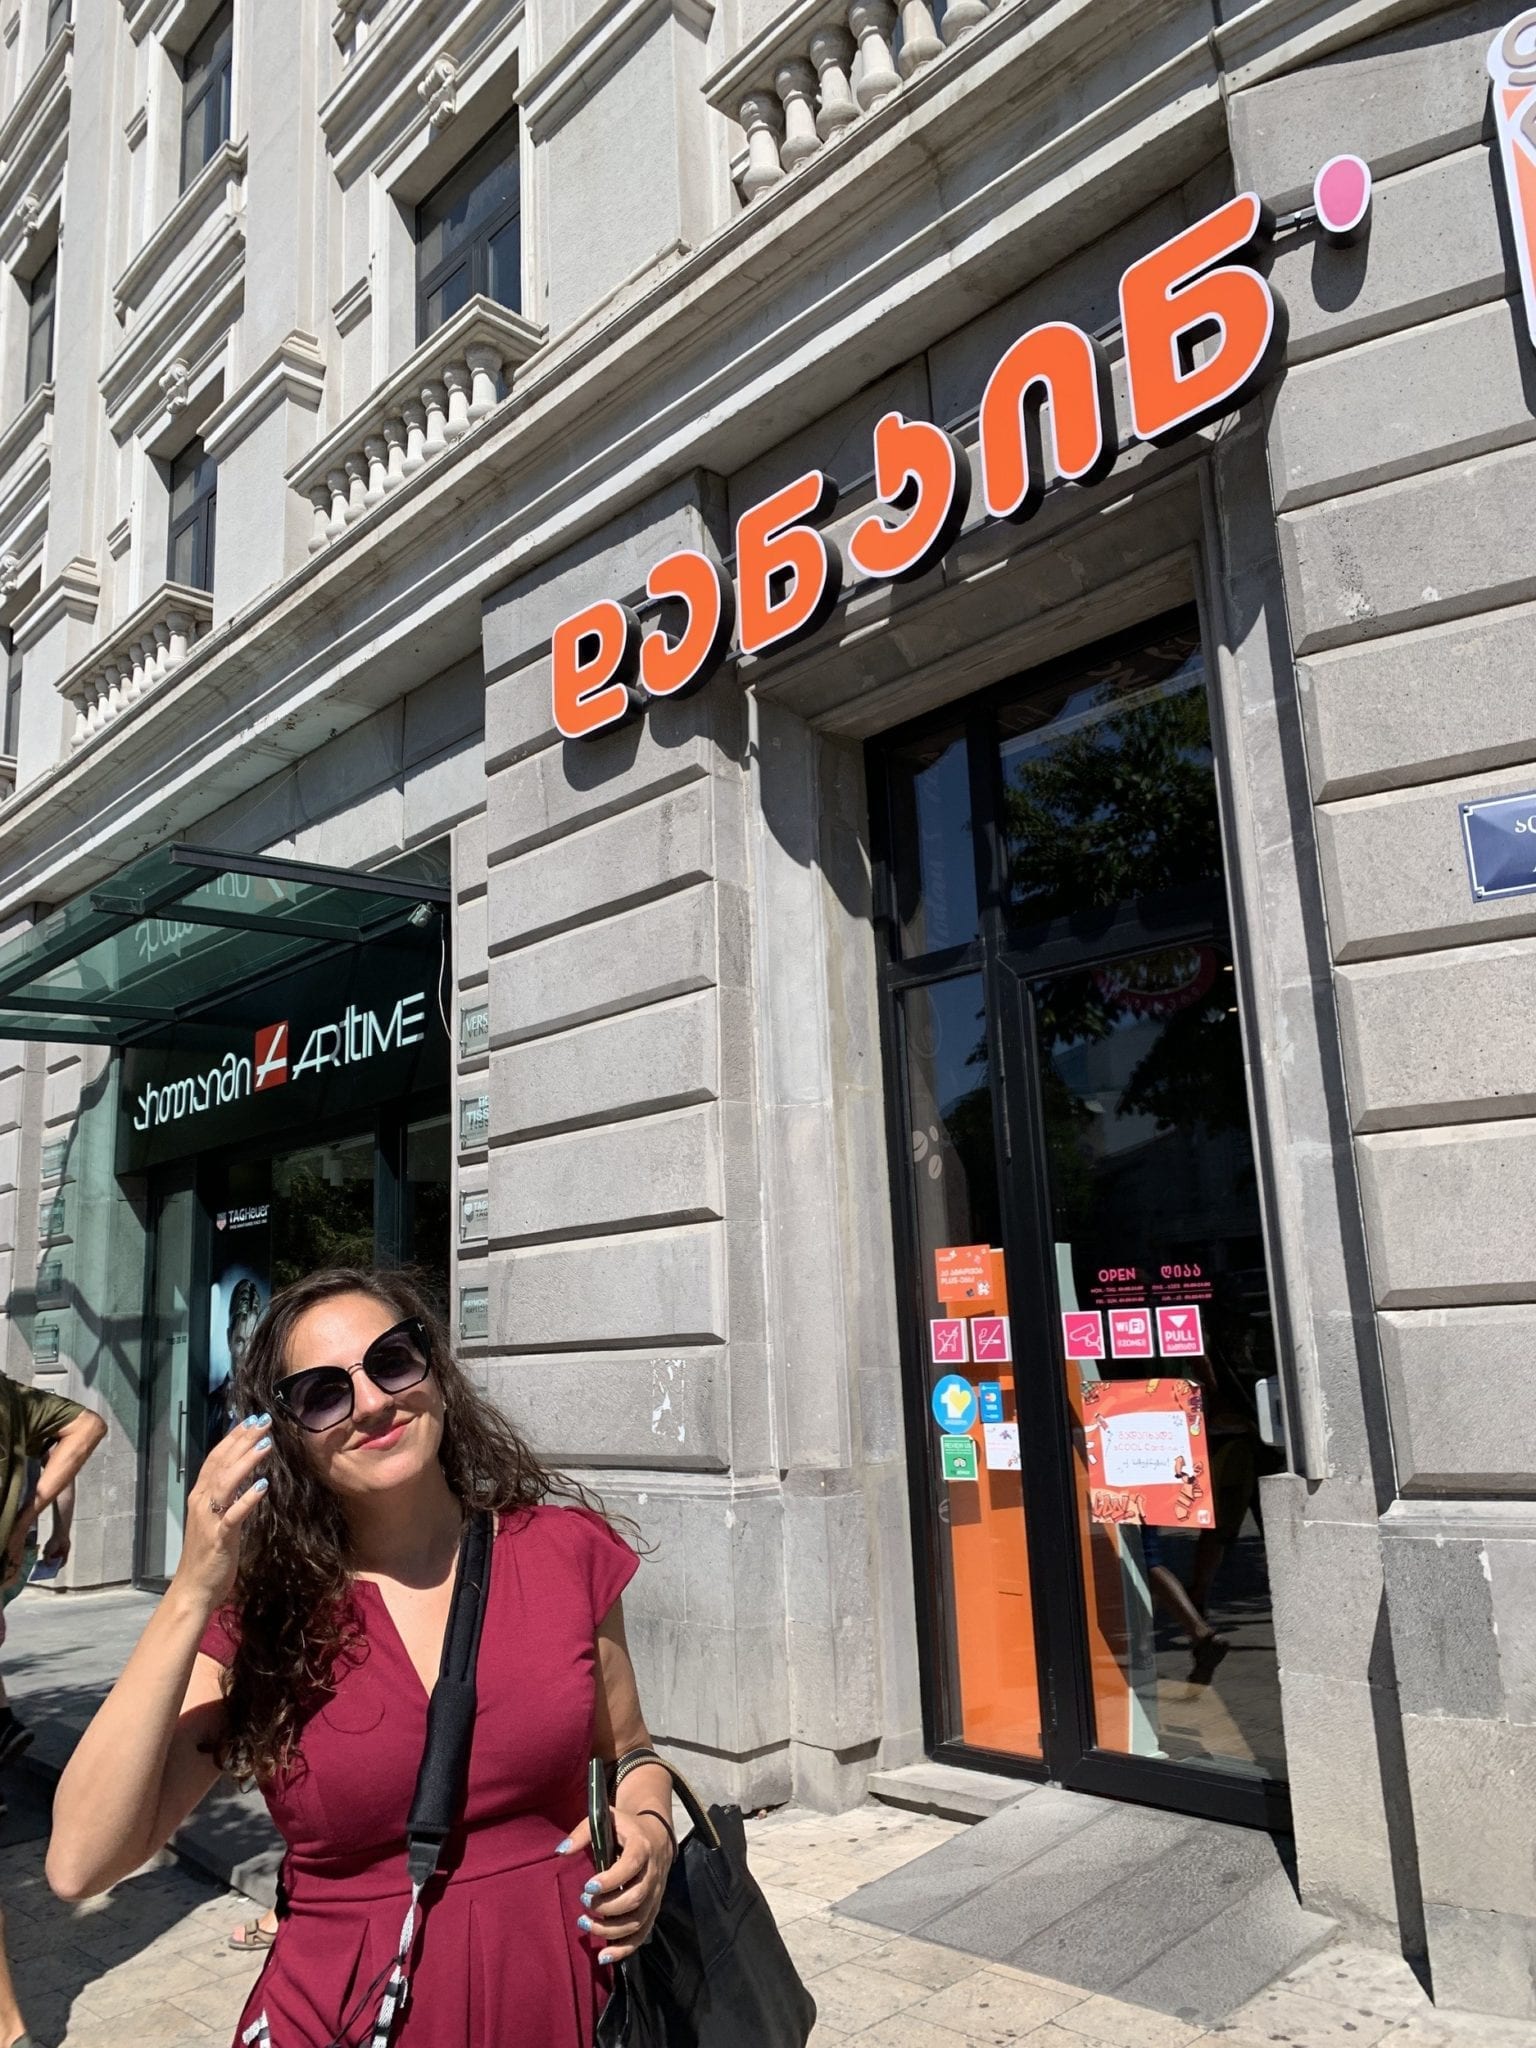 Kate smiles while standing in front of what looks like a Dunkin Donuts, with the name written in Georgian script.